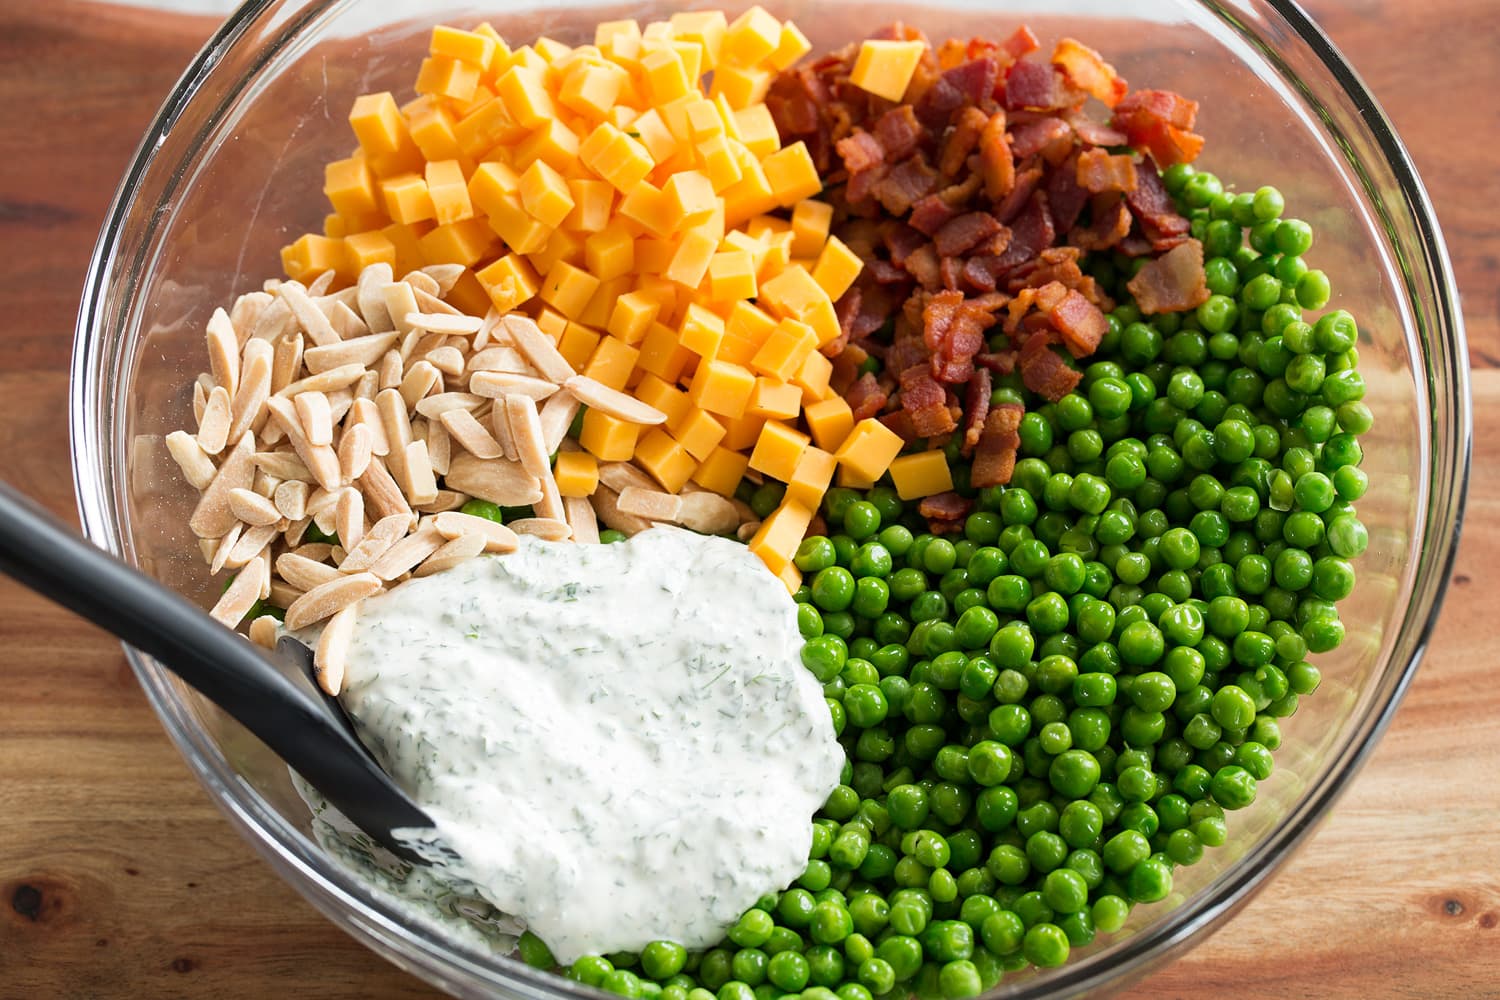 Pea salad prepared ingredients in a bowl shown before tossing.